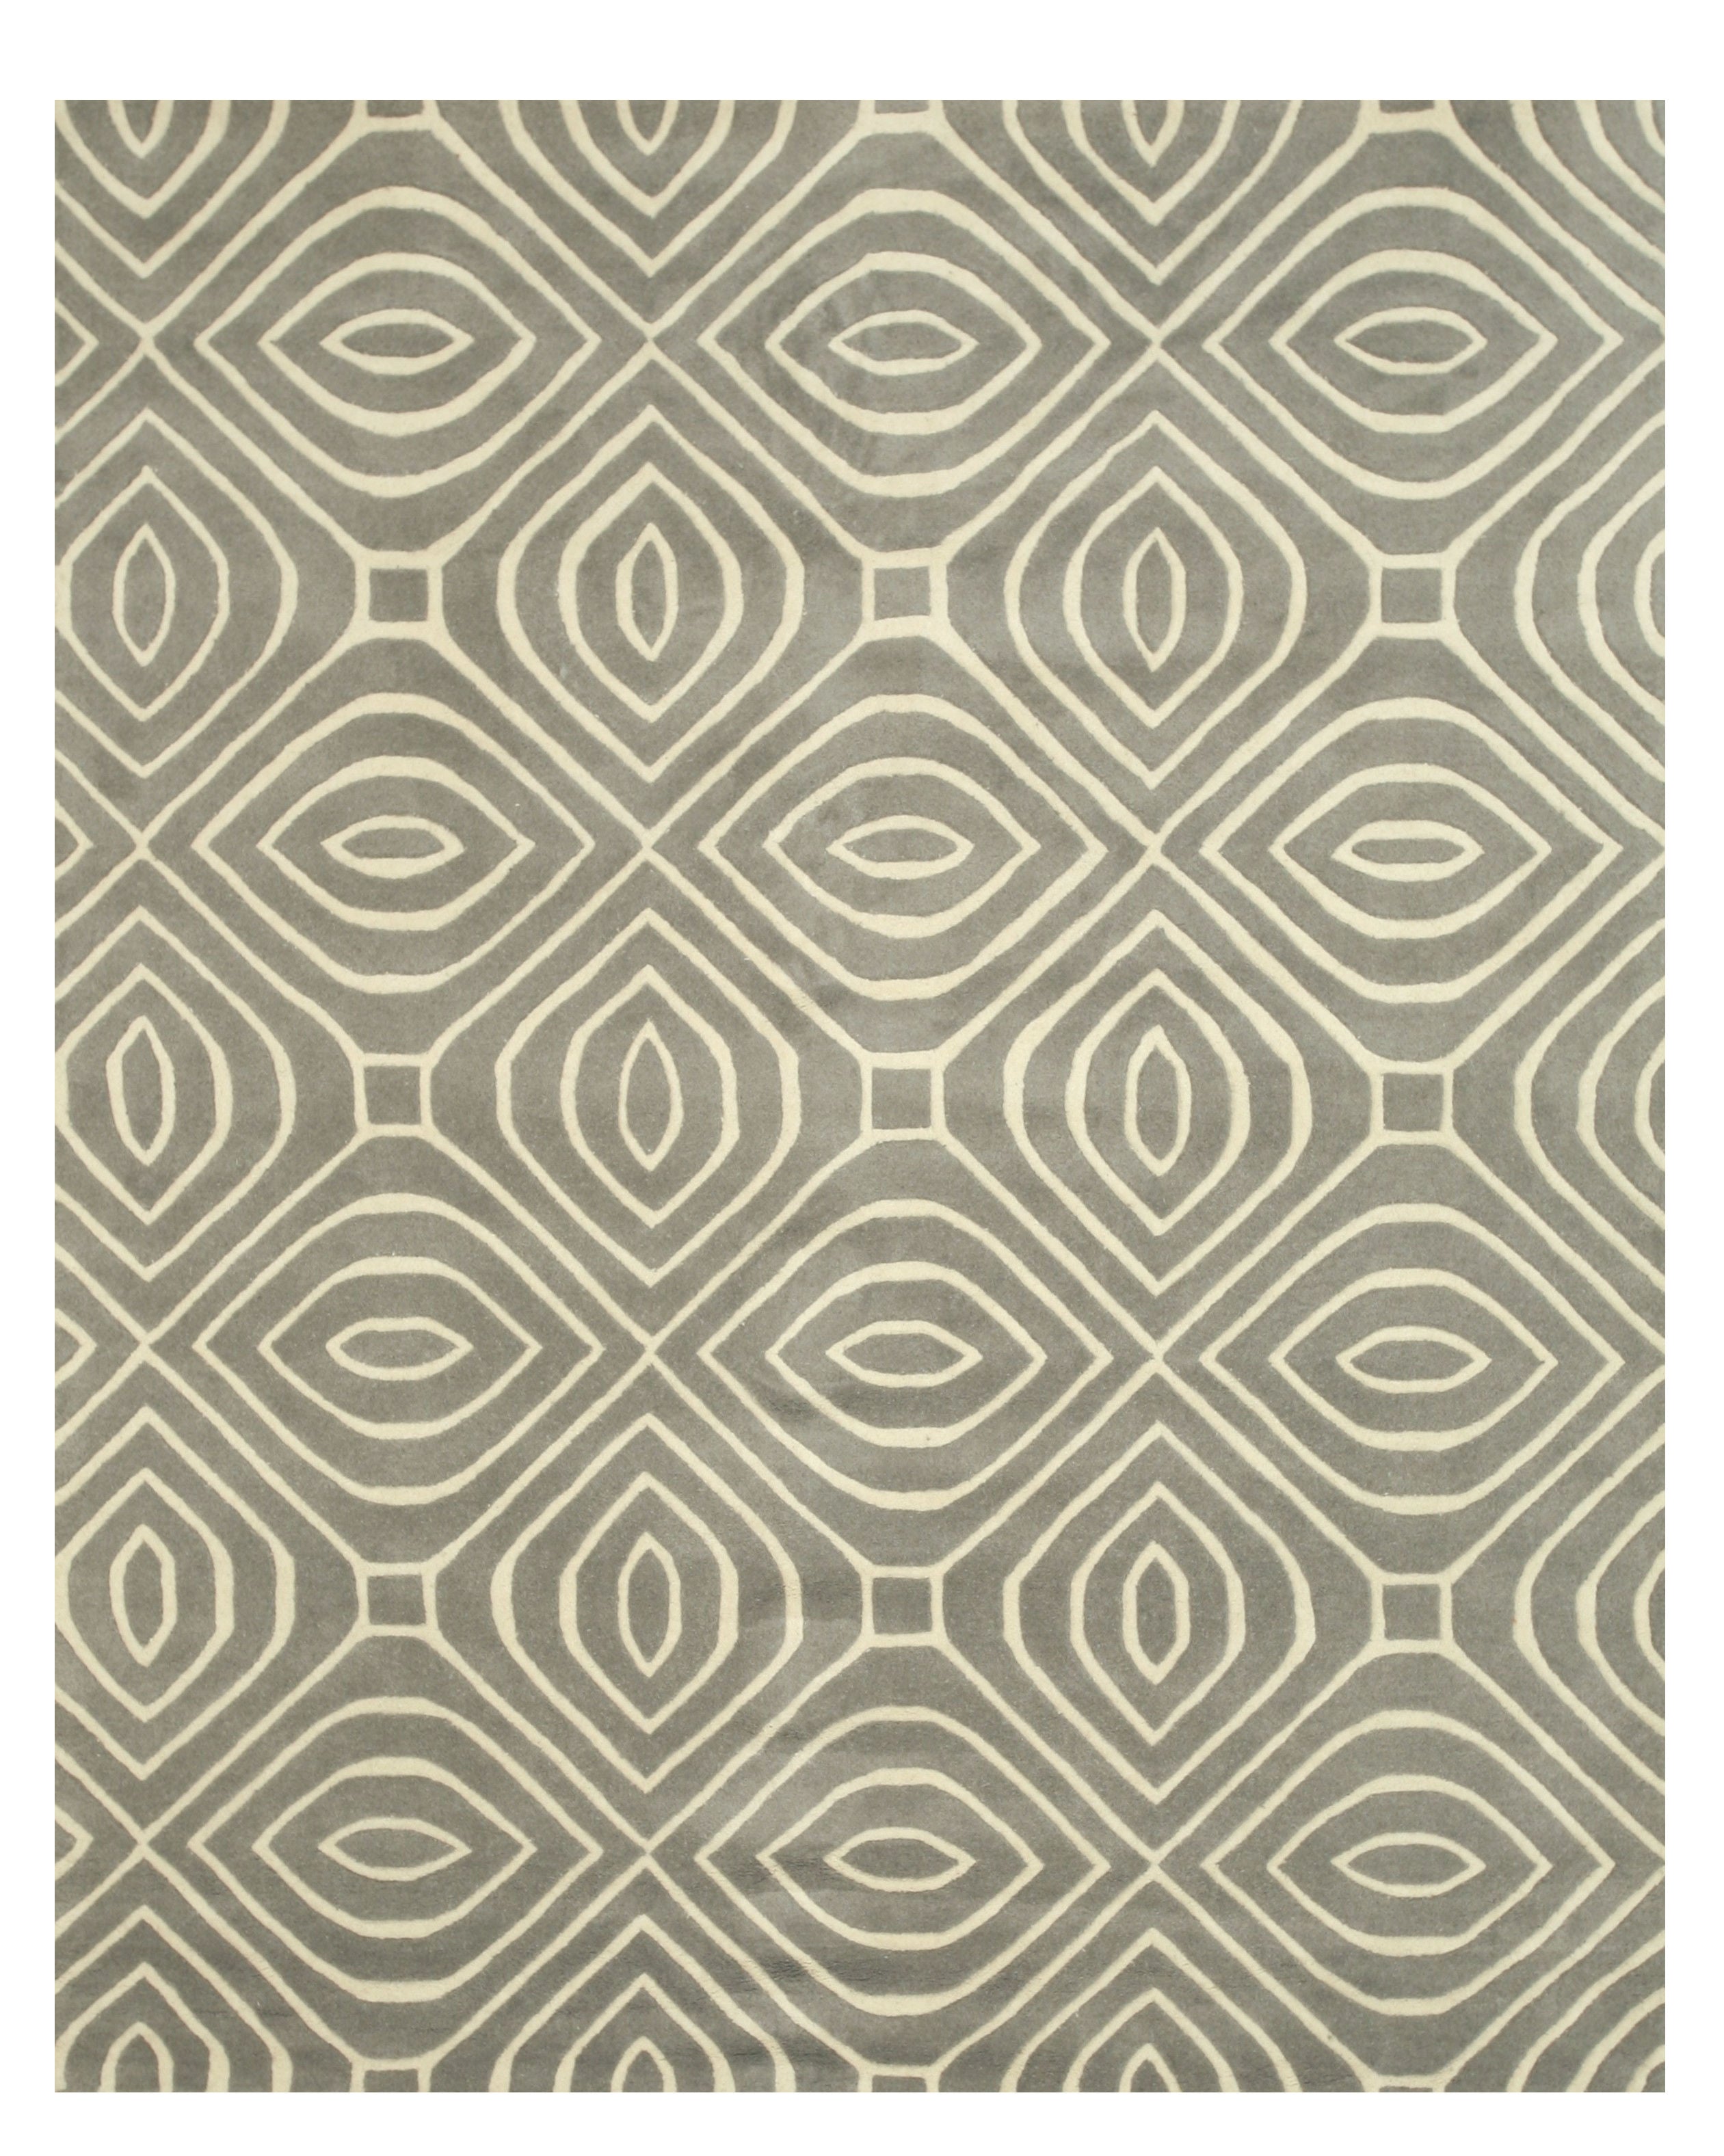 EORC Hand-tufted Wool Gray Contemporary Geometric Marla Rug